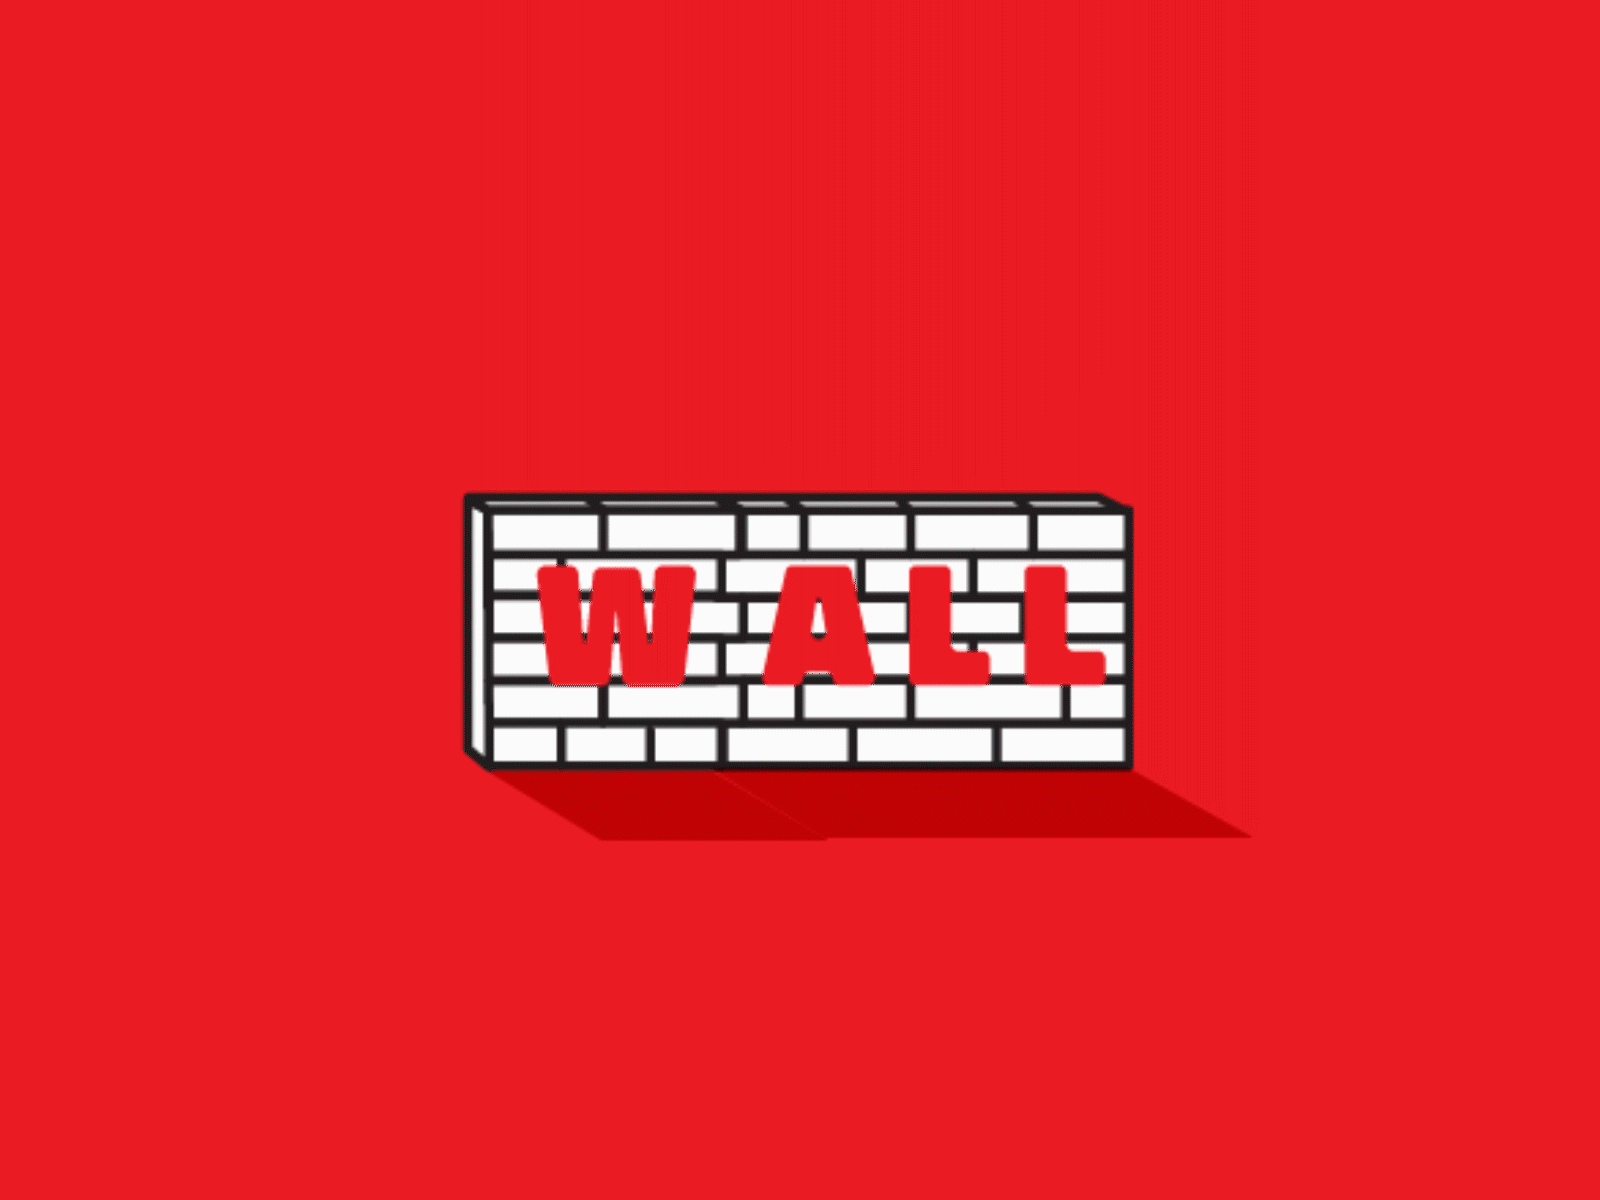 From wall to all animation gif gif animated illustrator immigration red simple social impact wall